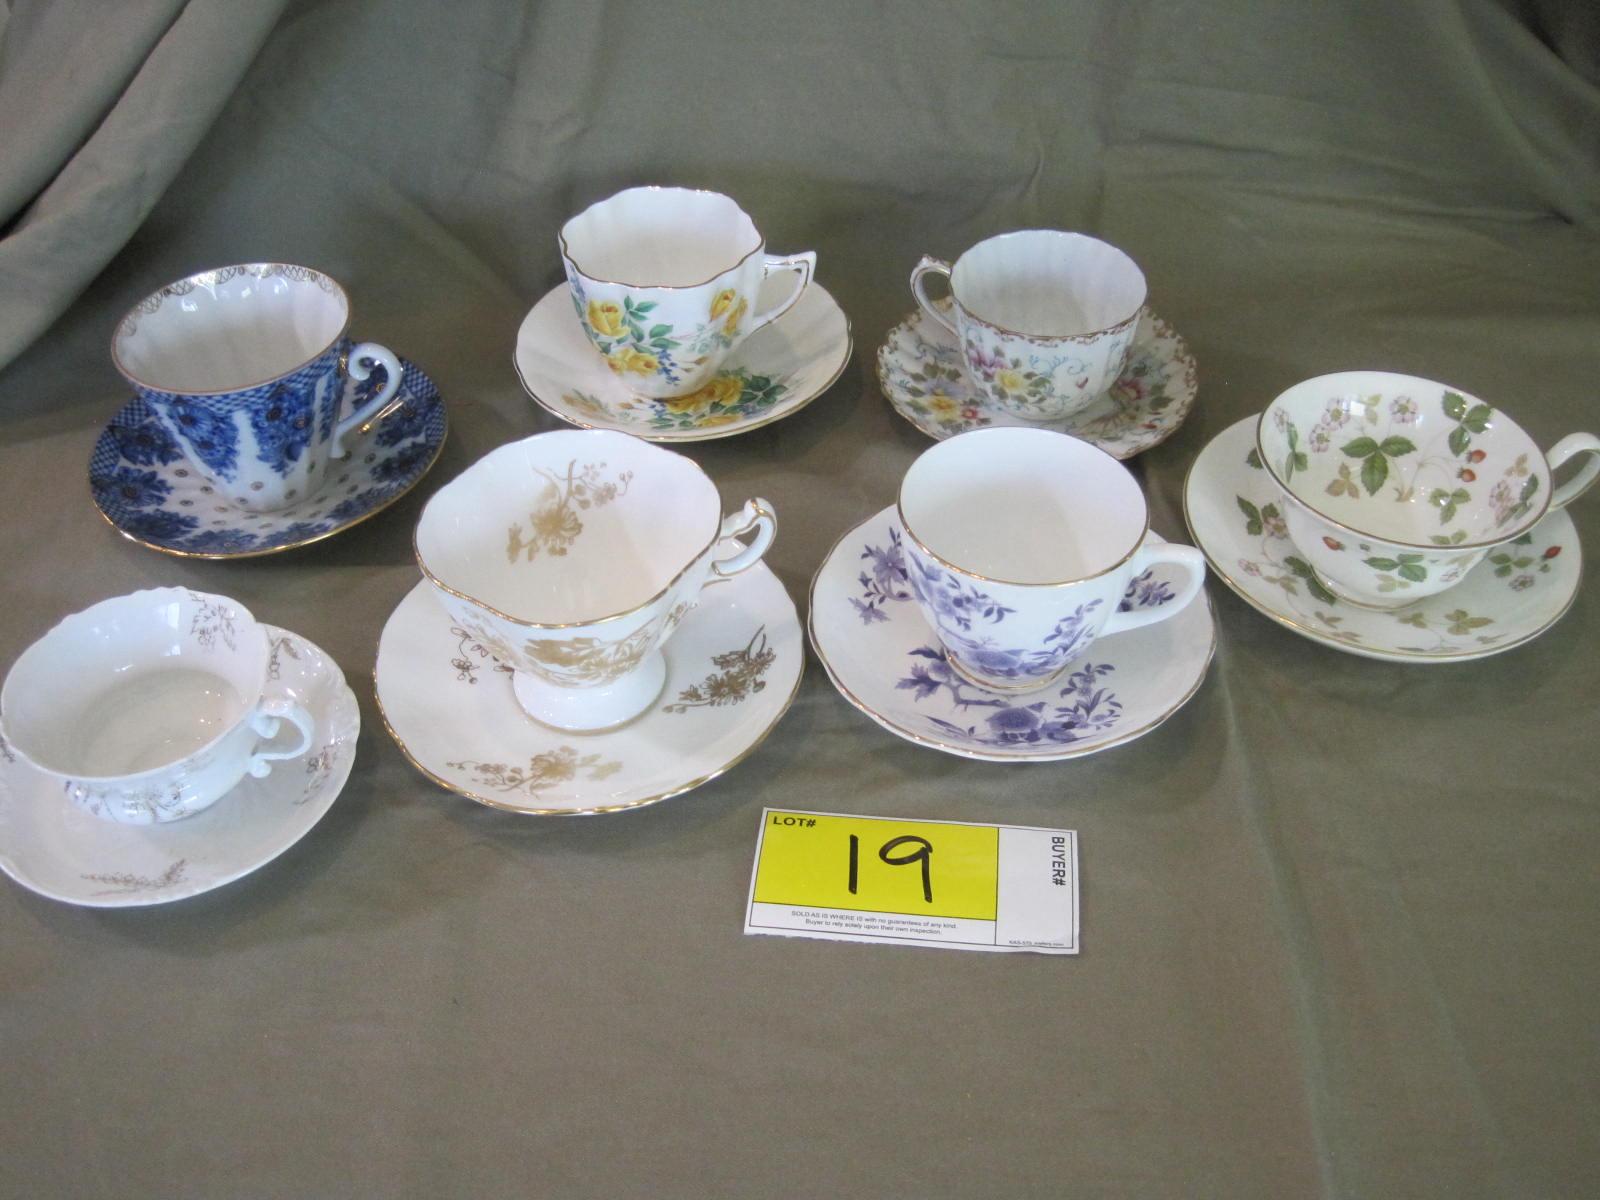 Cups/Saucers